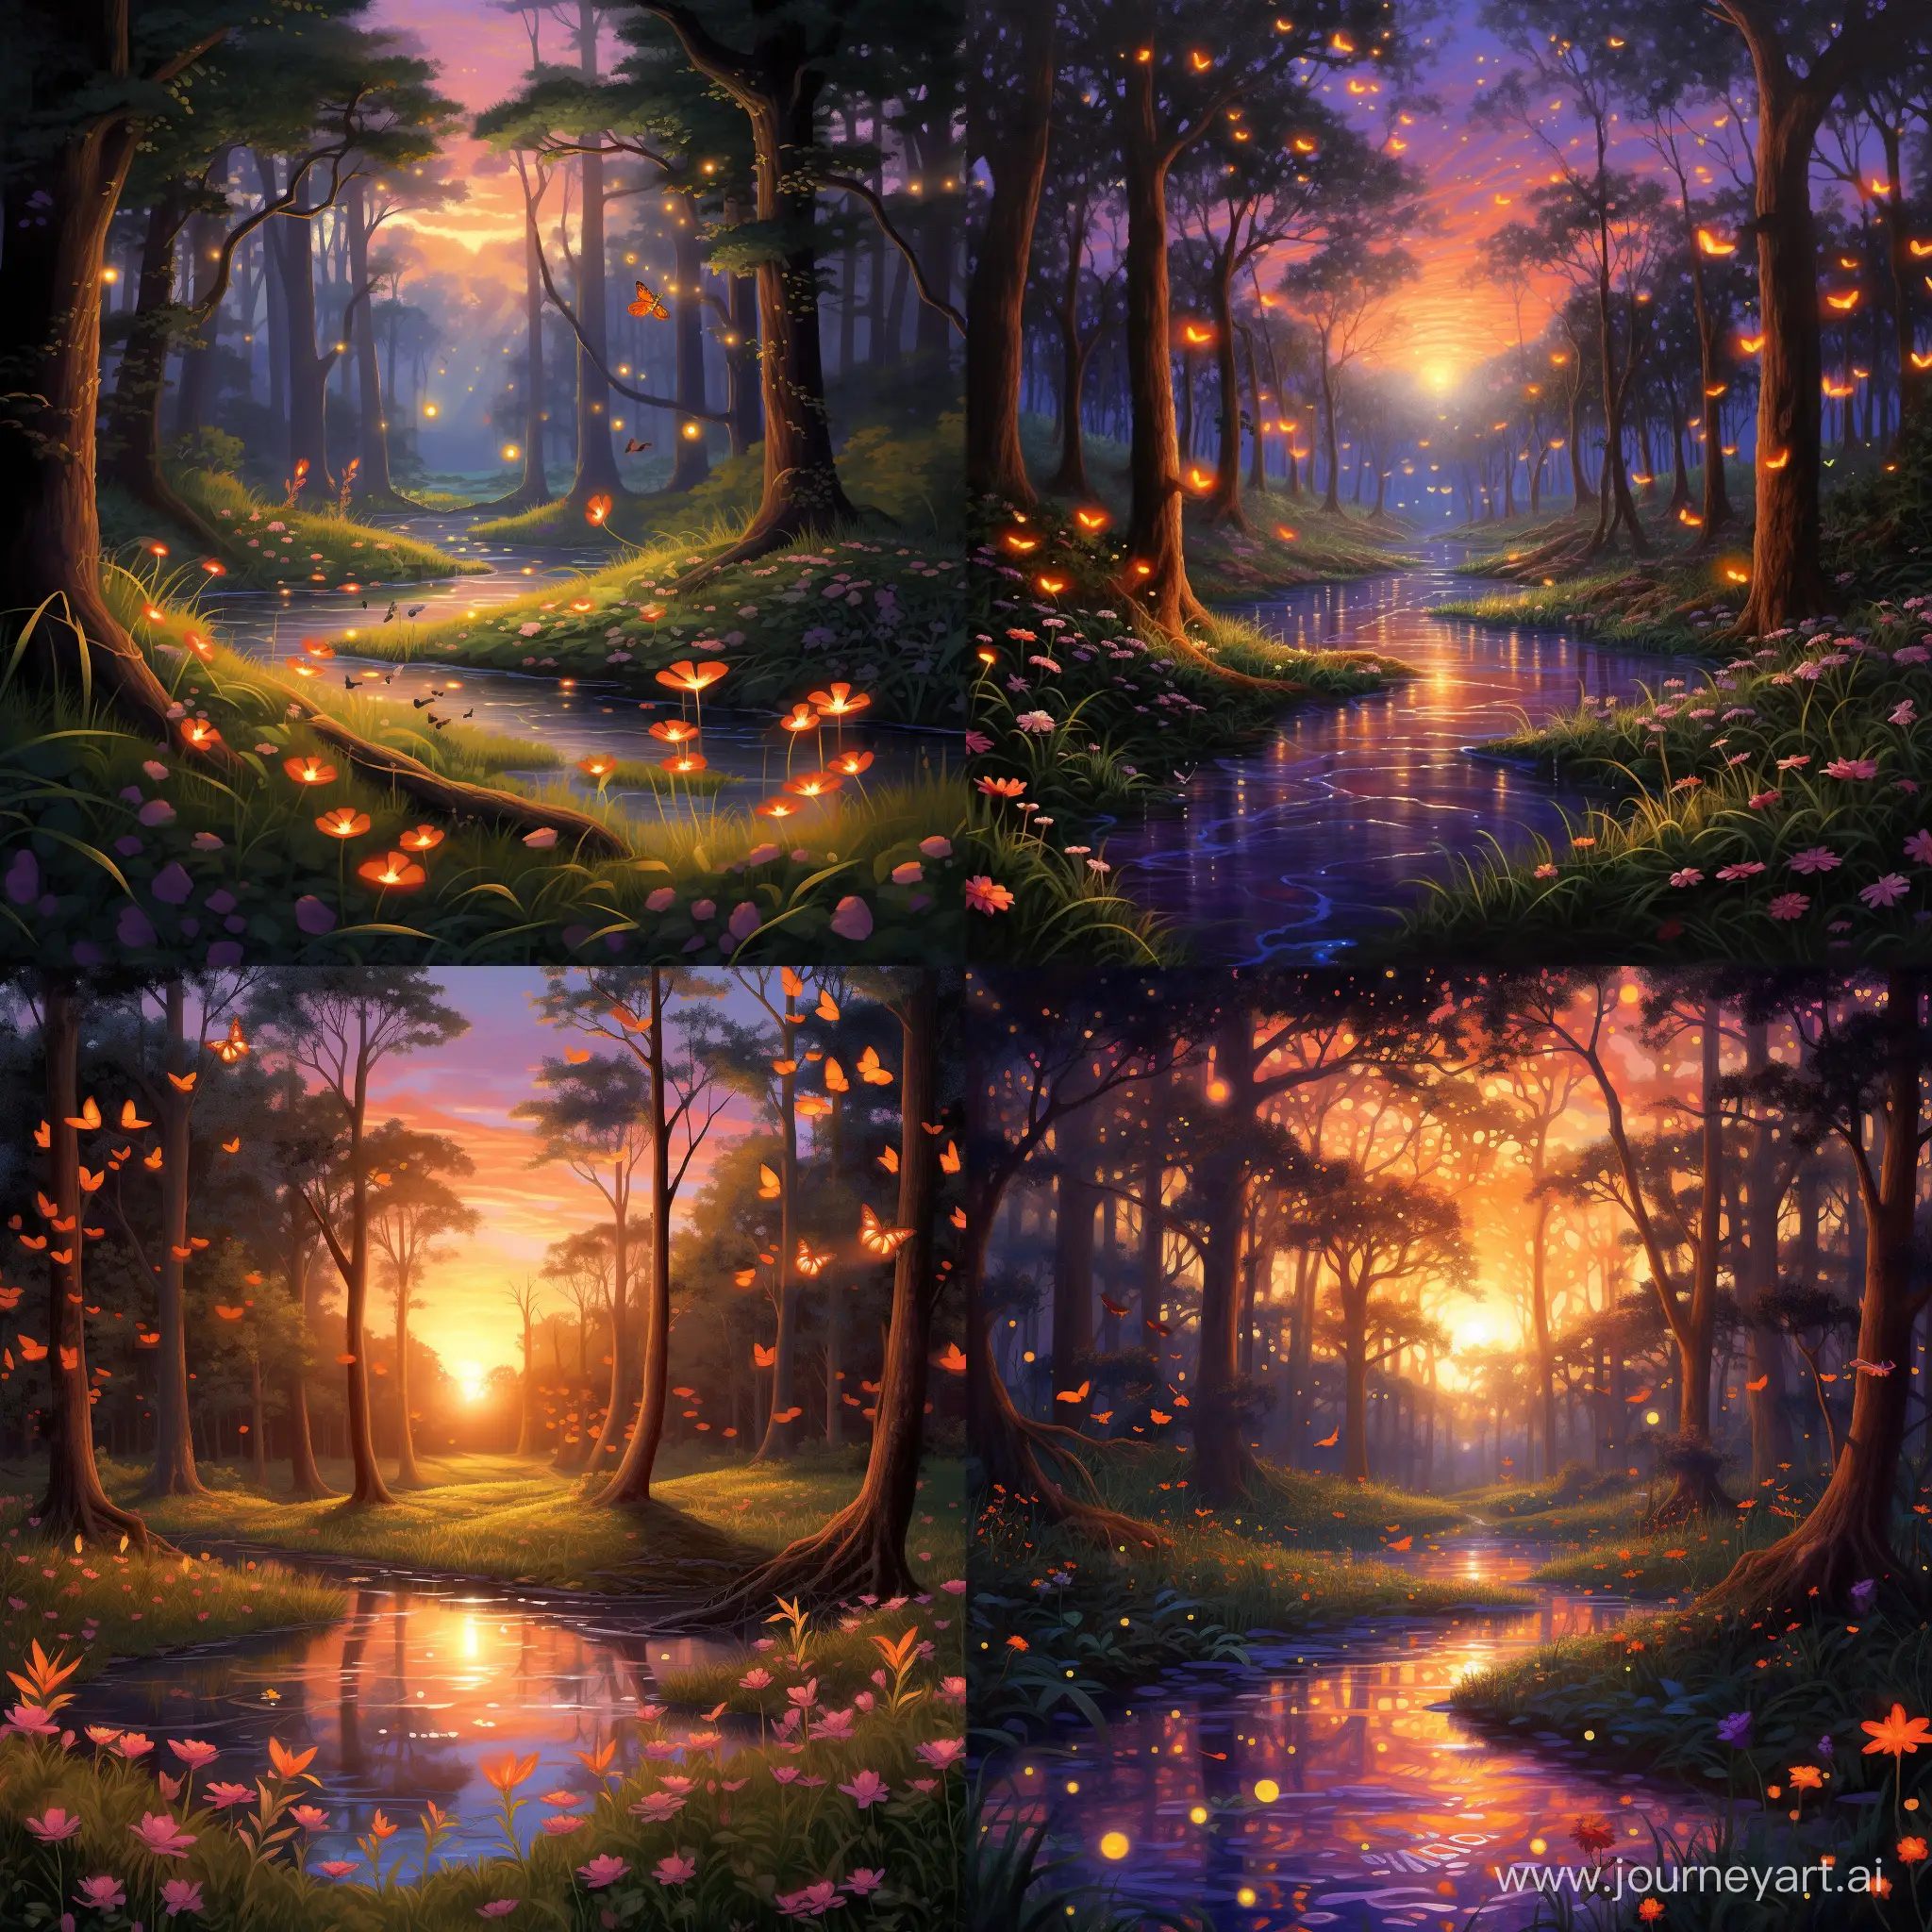 In a serene forest clearing, a vibrant sunset casts warm hues over a group of whimsical fireflies dancing in the twilight.